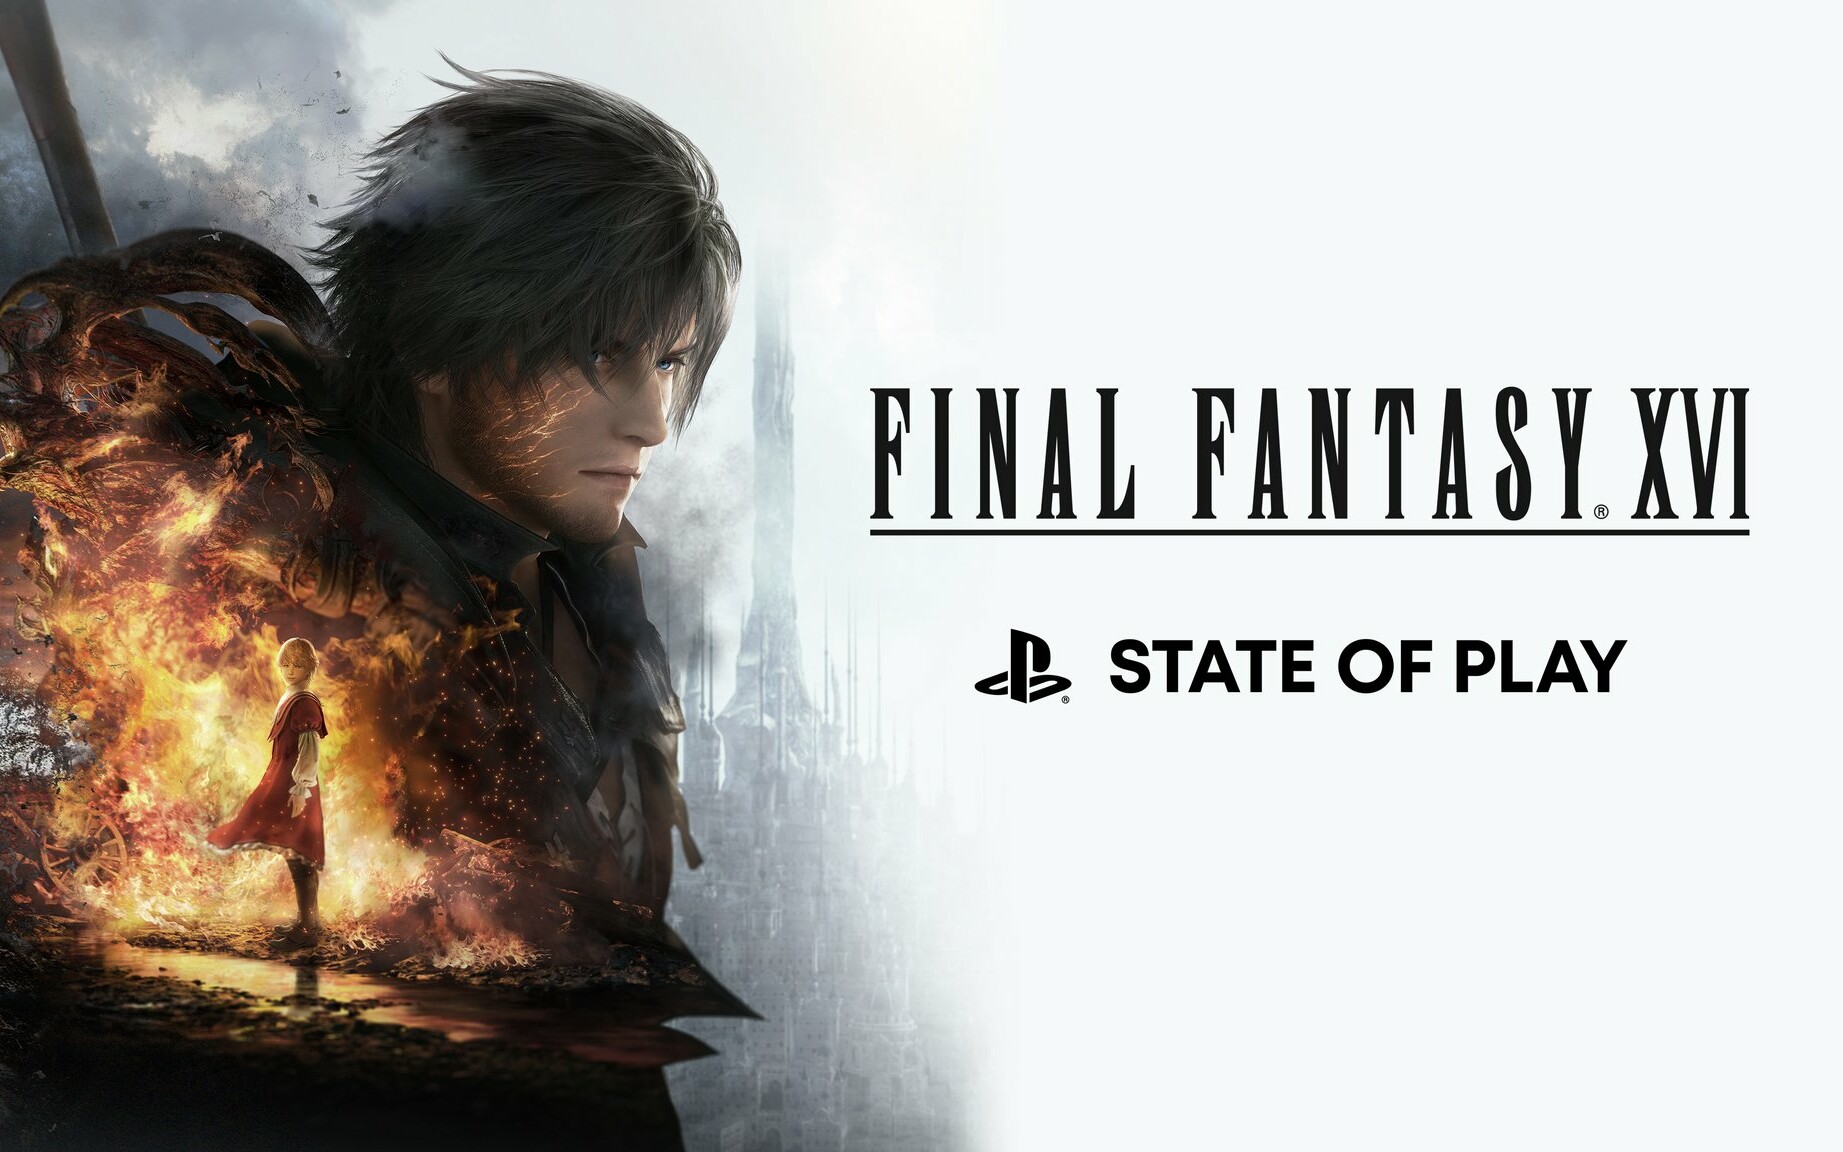 Final Fantasy XVI - State of Play